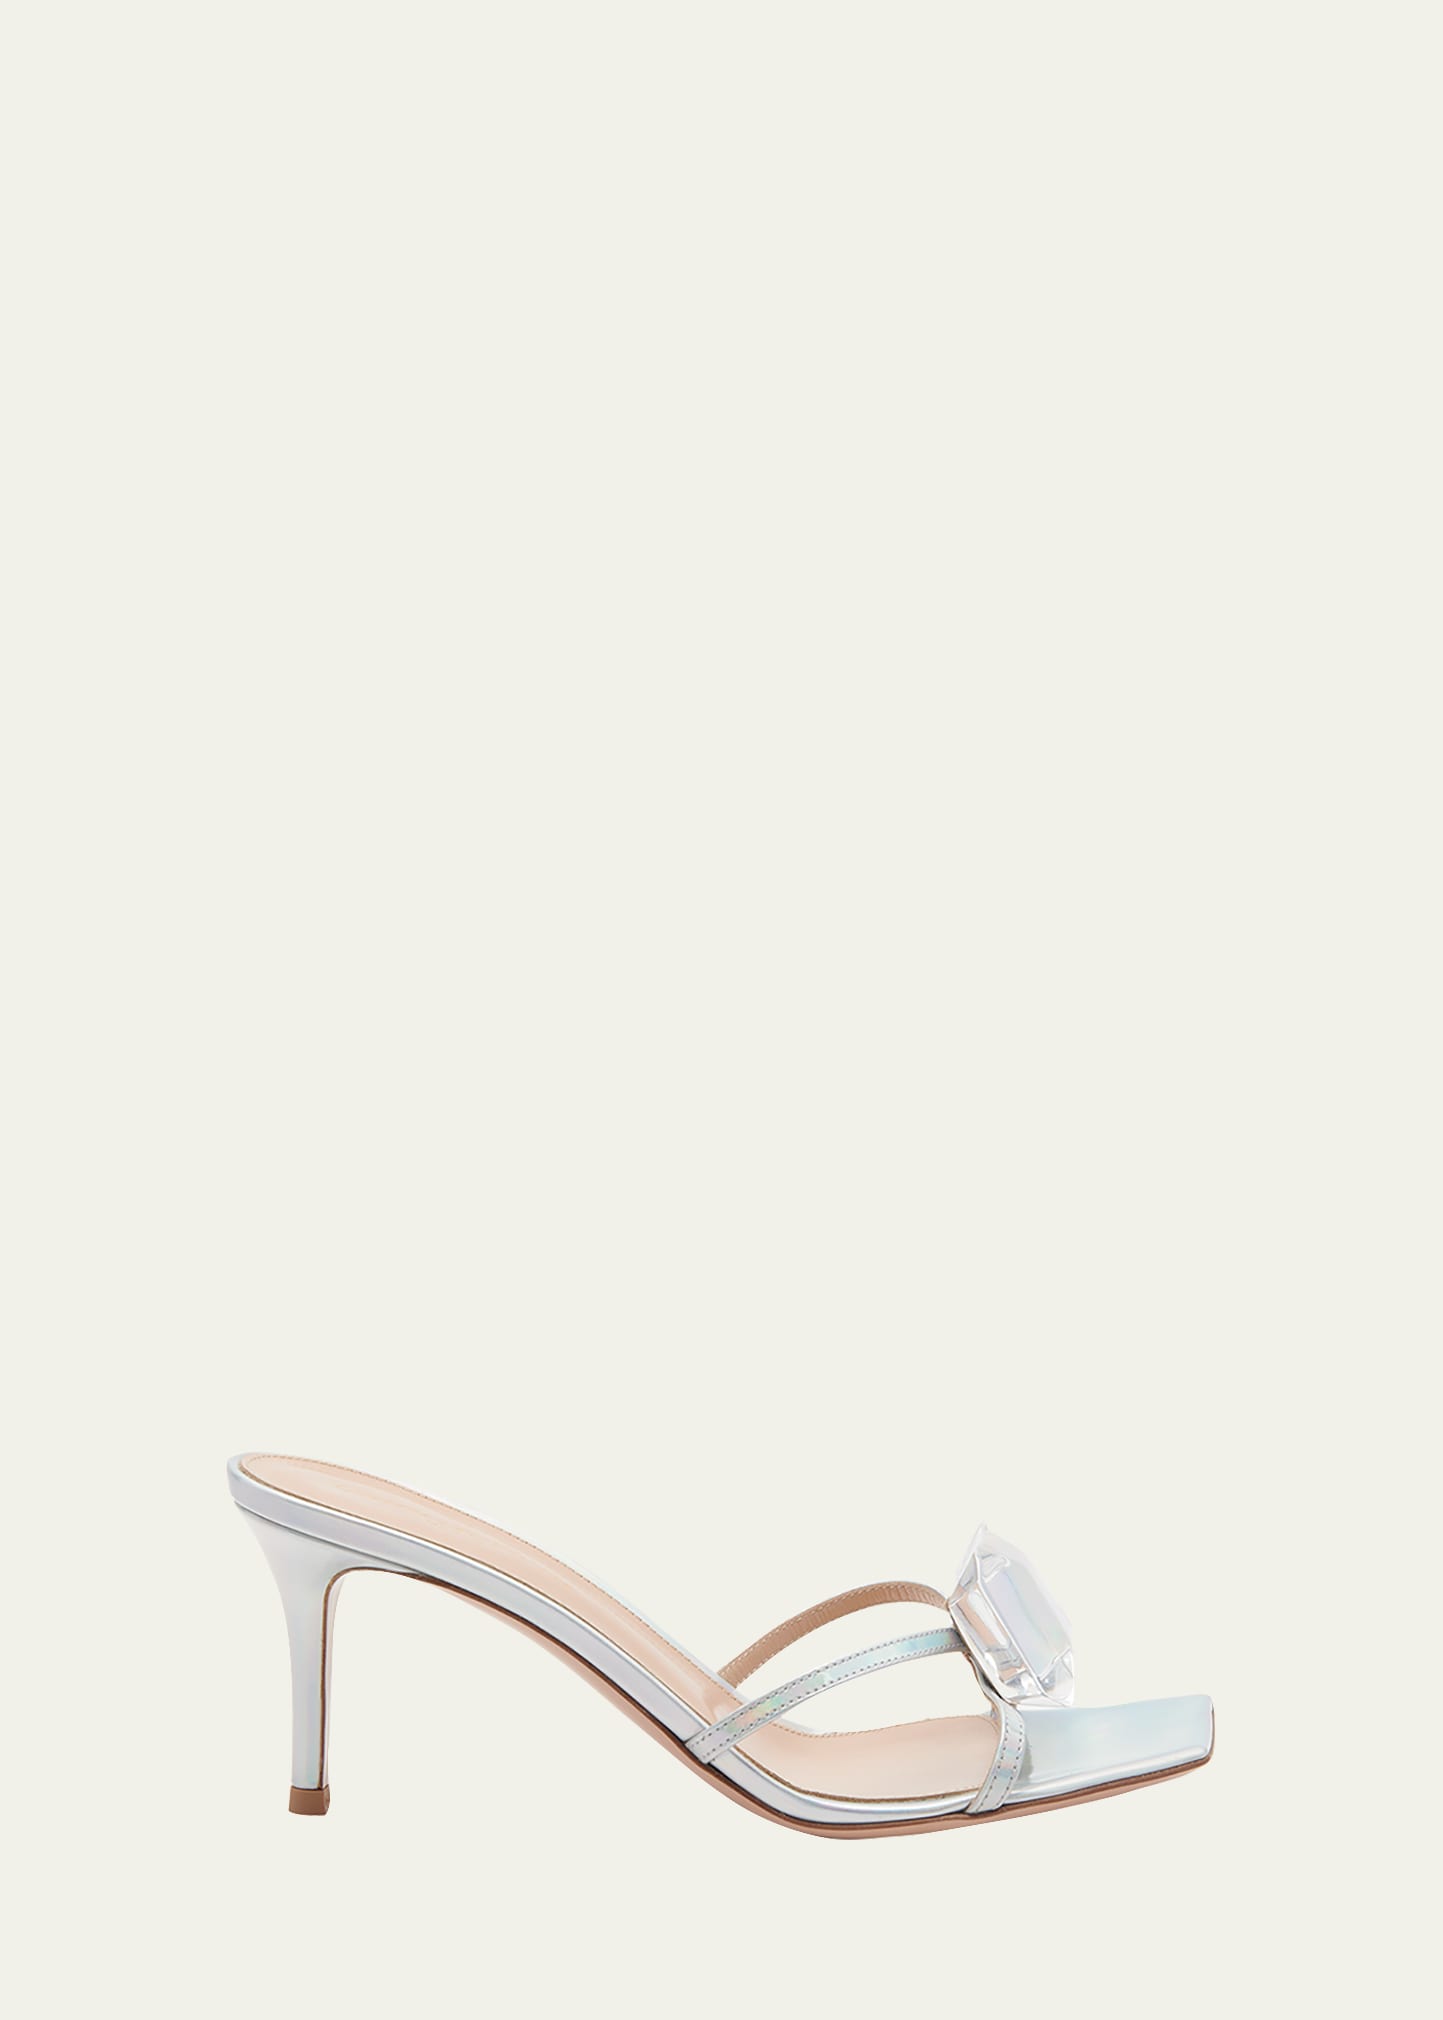 Shop Gianvito Rossi 70mm Jewel Iridescent Leather Mule Sandals In Hologram